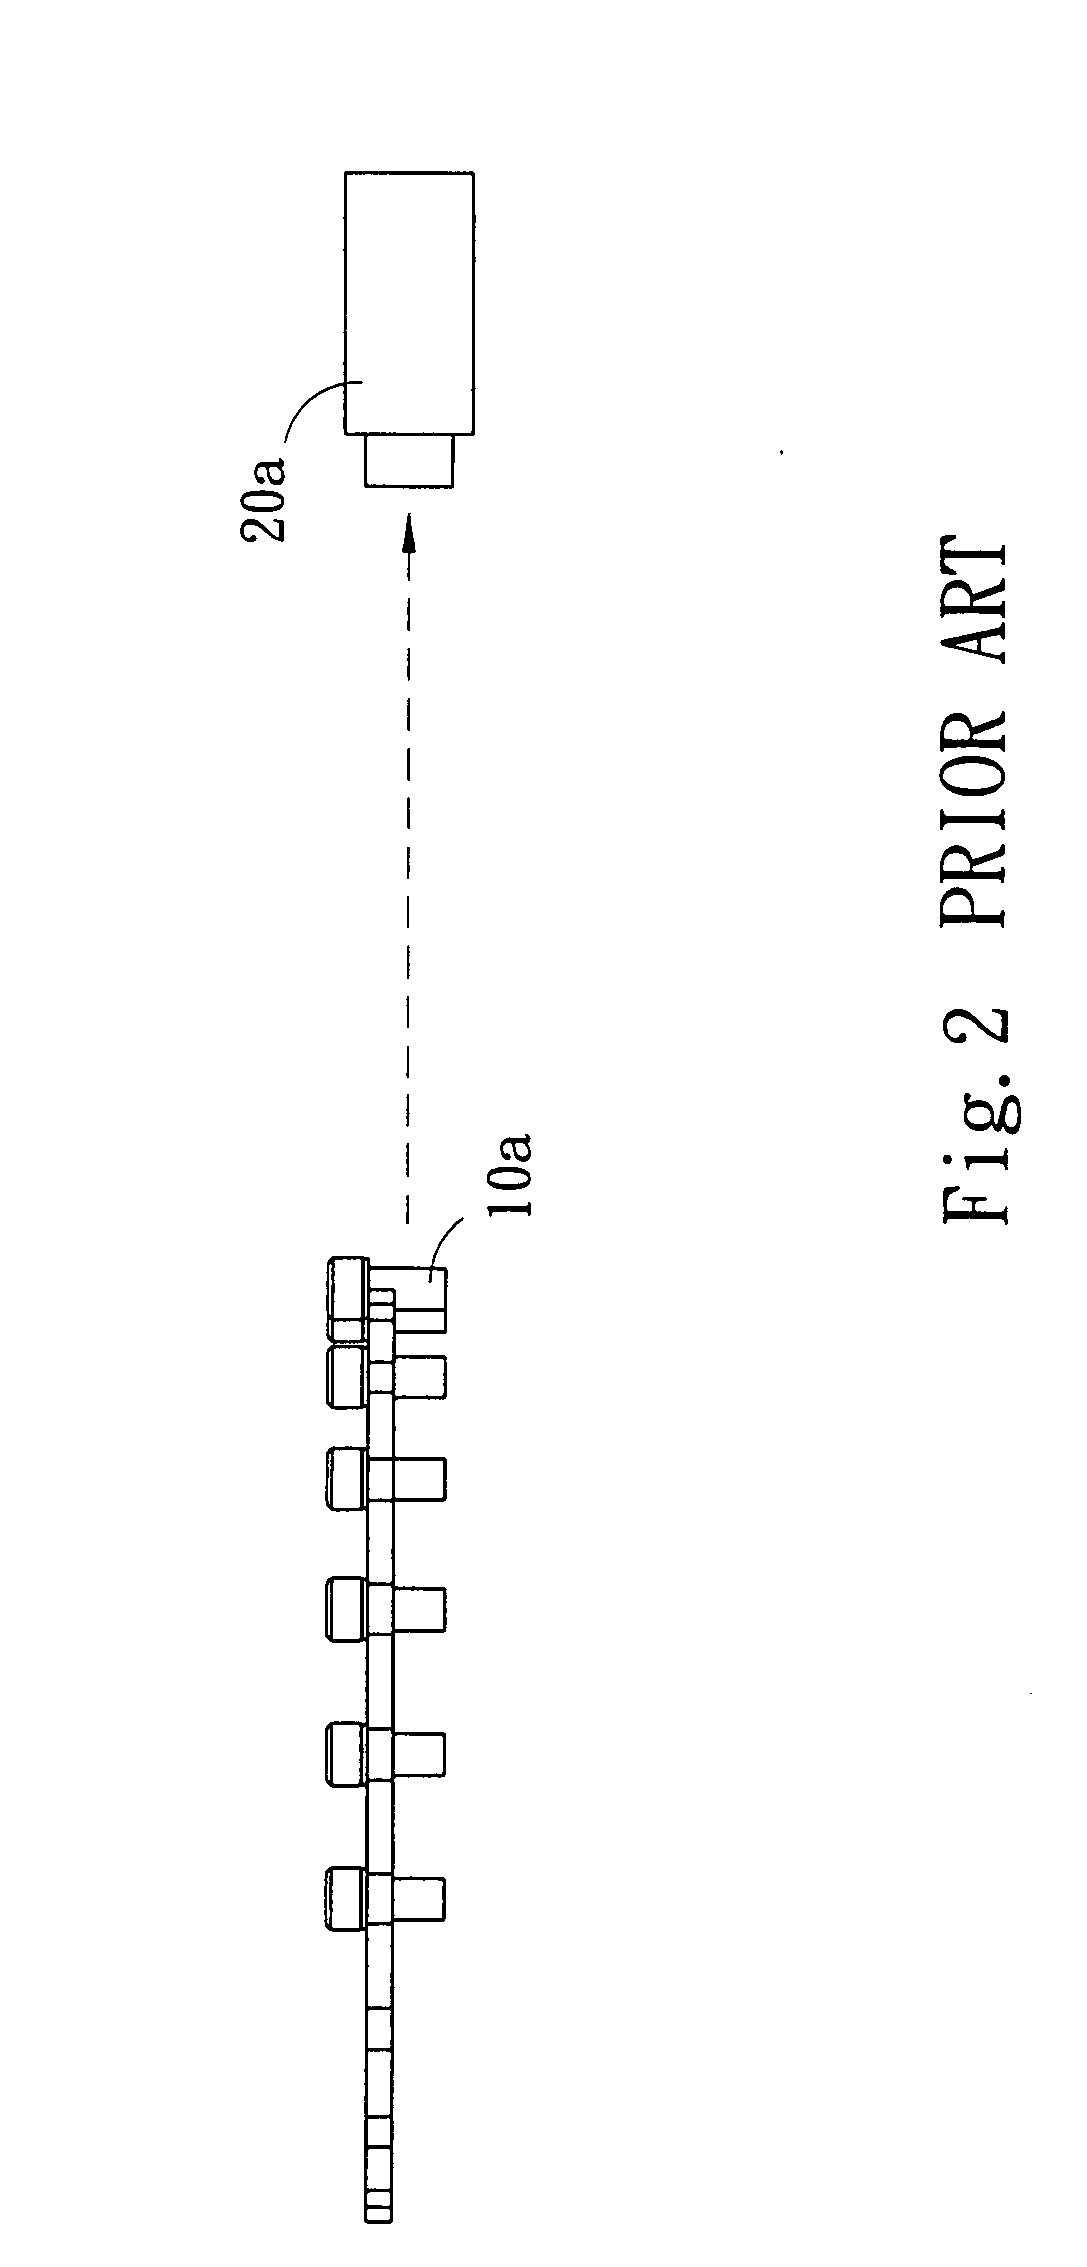 Component inspection imaging apparatus structure